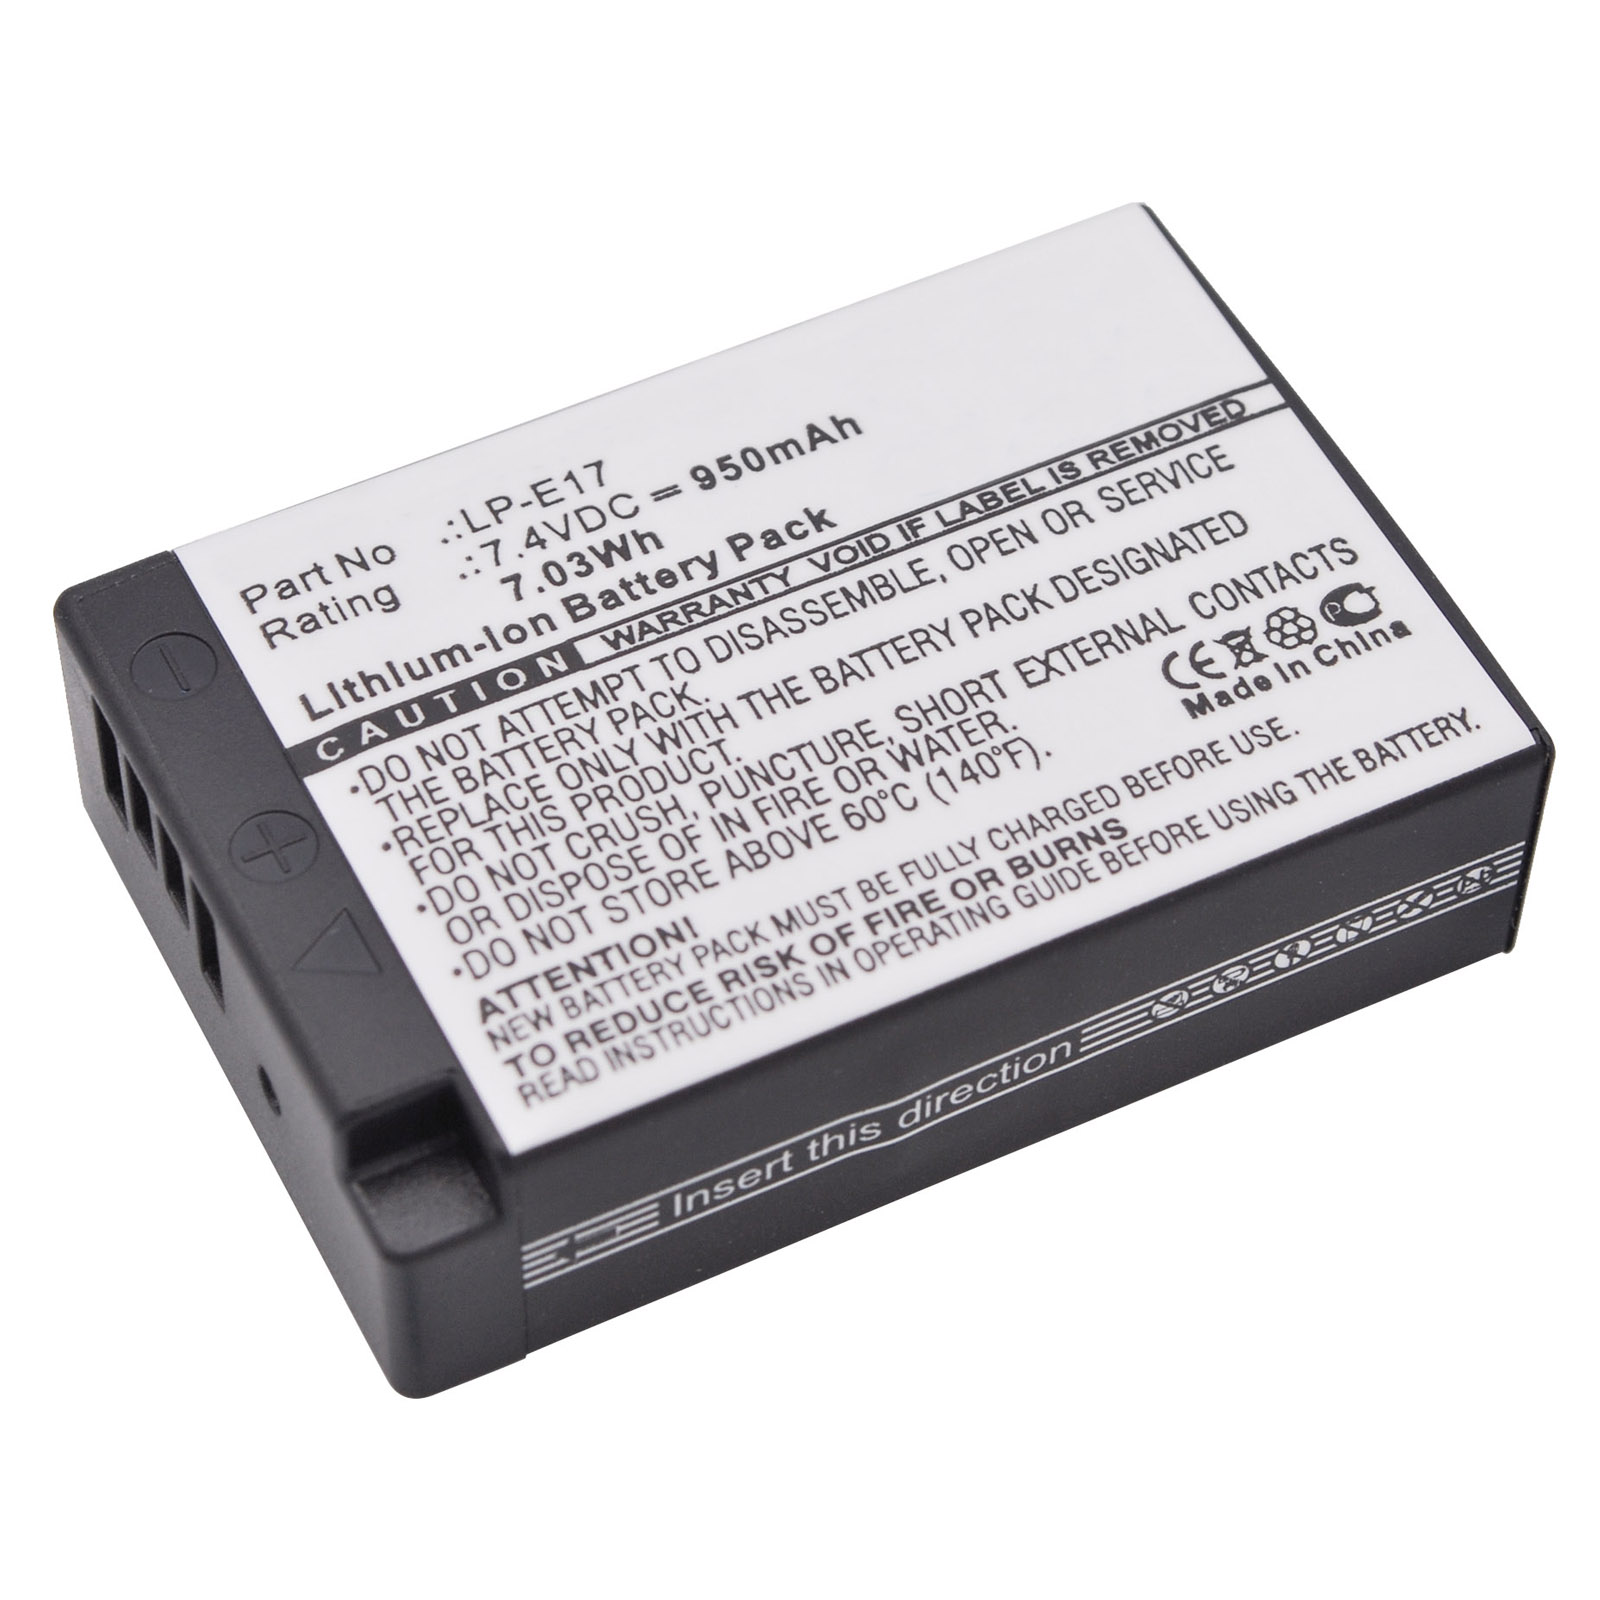 Synergy Digital Camera Battery, Compatible with Canon EOS 200D, EOS 750D, EOS 760D, EOS 770D, EOS 800D, EOS Kiss X8i, EOS M3, EOS M5, EOS M6, EOS Rebel T6i, EOS Rebel T6s Camera Battery (7.4, Li-ion, 950mAh)